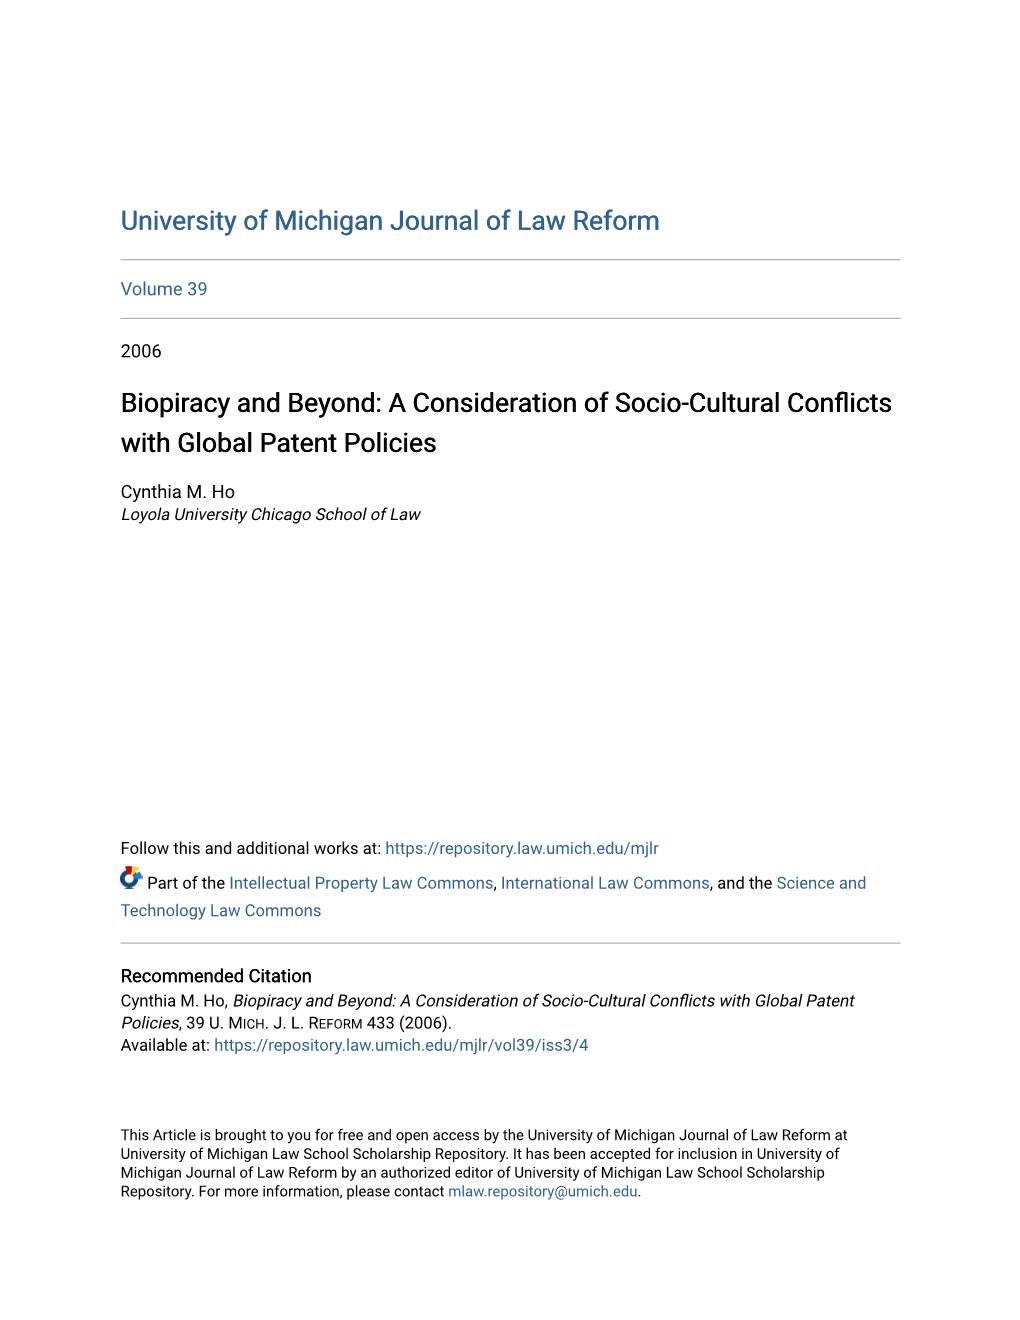 A Consideration of Socio-Cultural Conflicts with Global Patent Policies